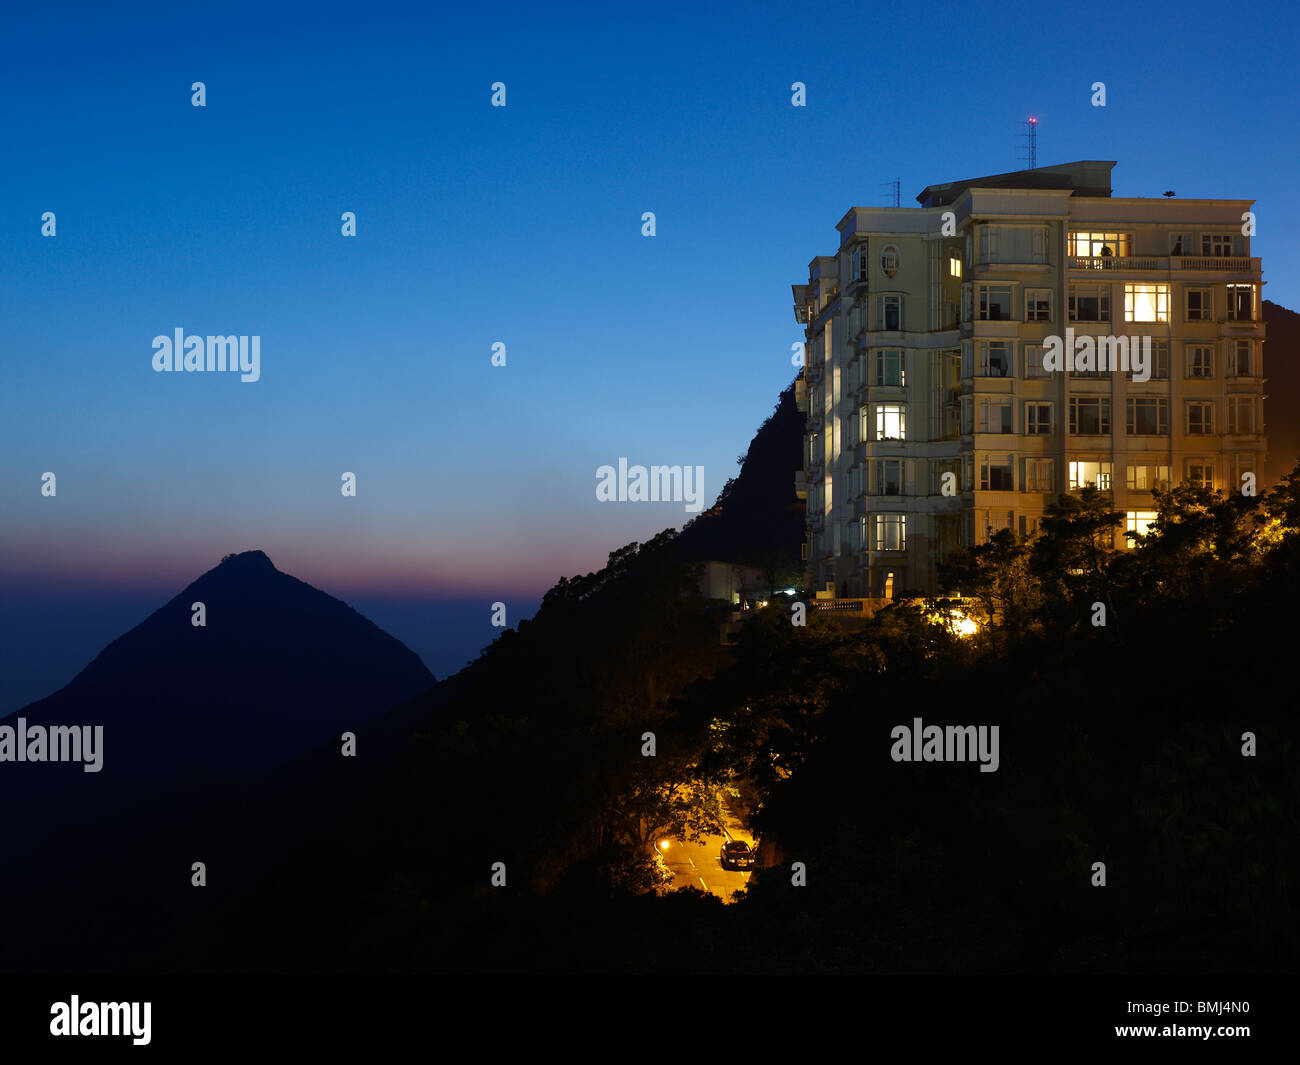 An apartment building situated on top of the mountain in Hong Kong peninsula, a prime property spot for the rich and famous. Stock Photo